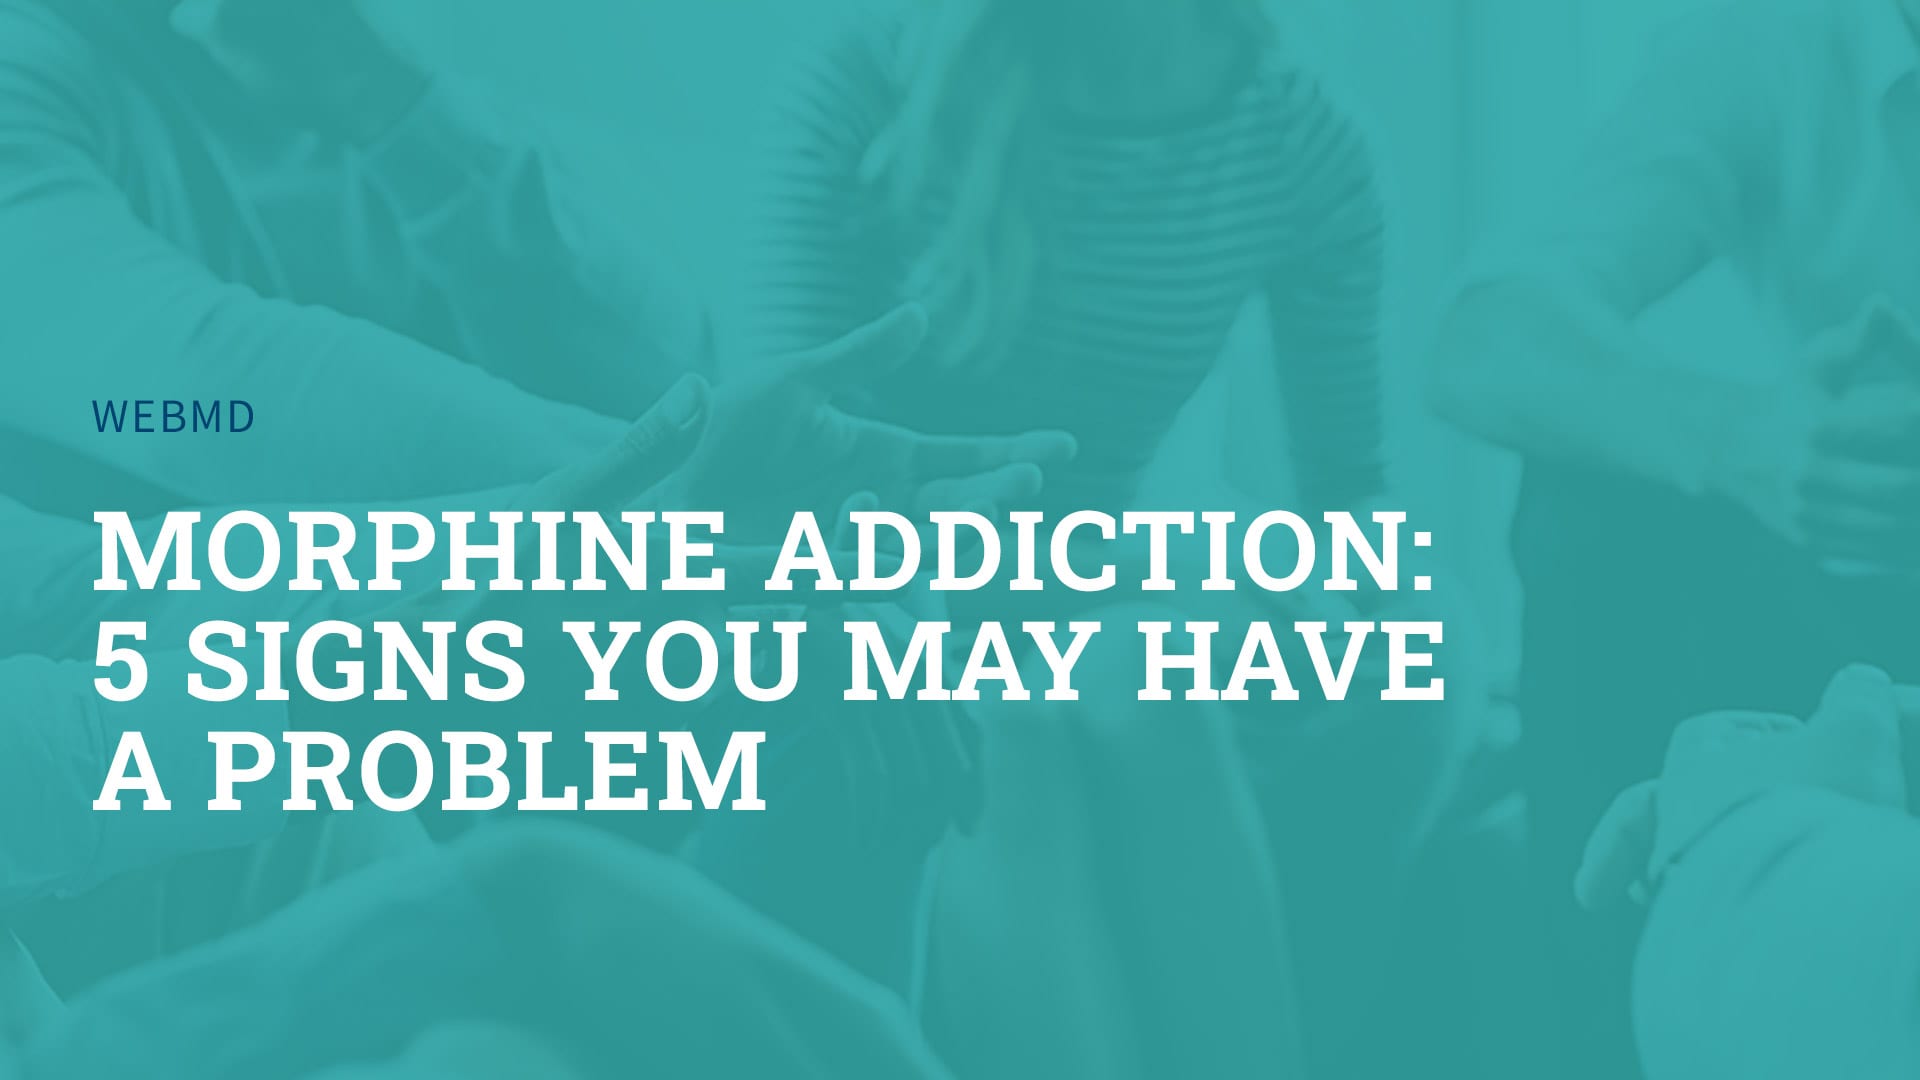 morphine addiction: 5 signs you may have a problem